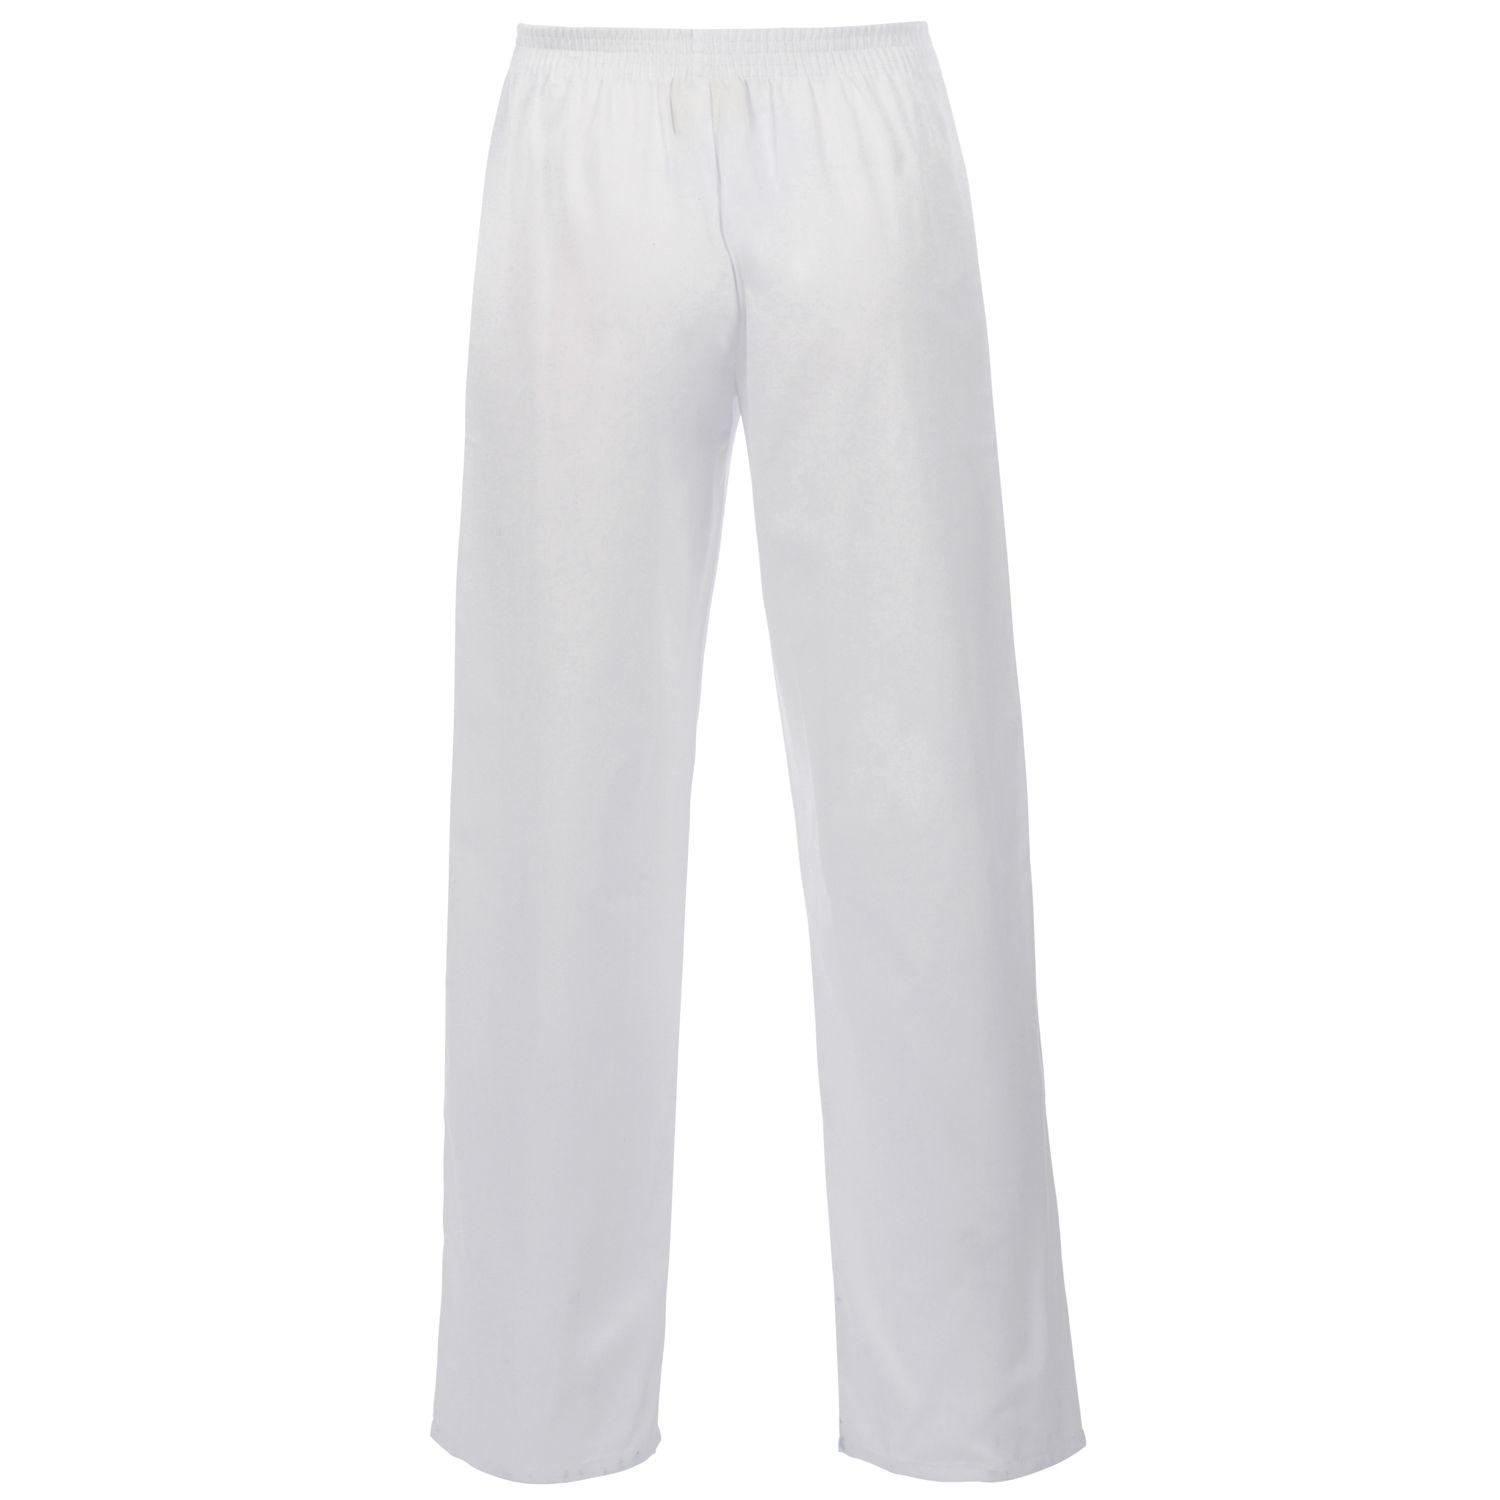 Food Industry trousers white Unisex 57T00